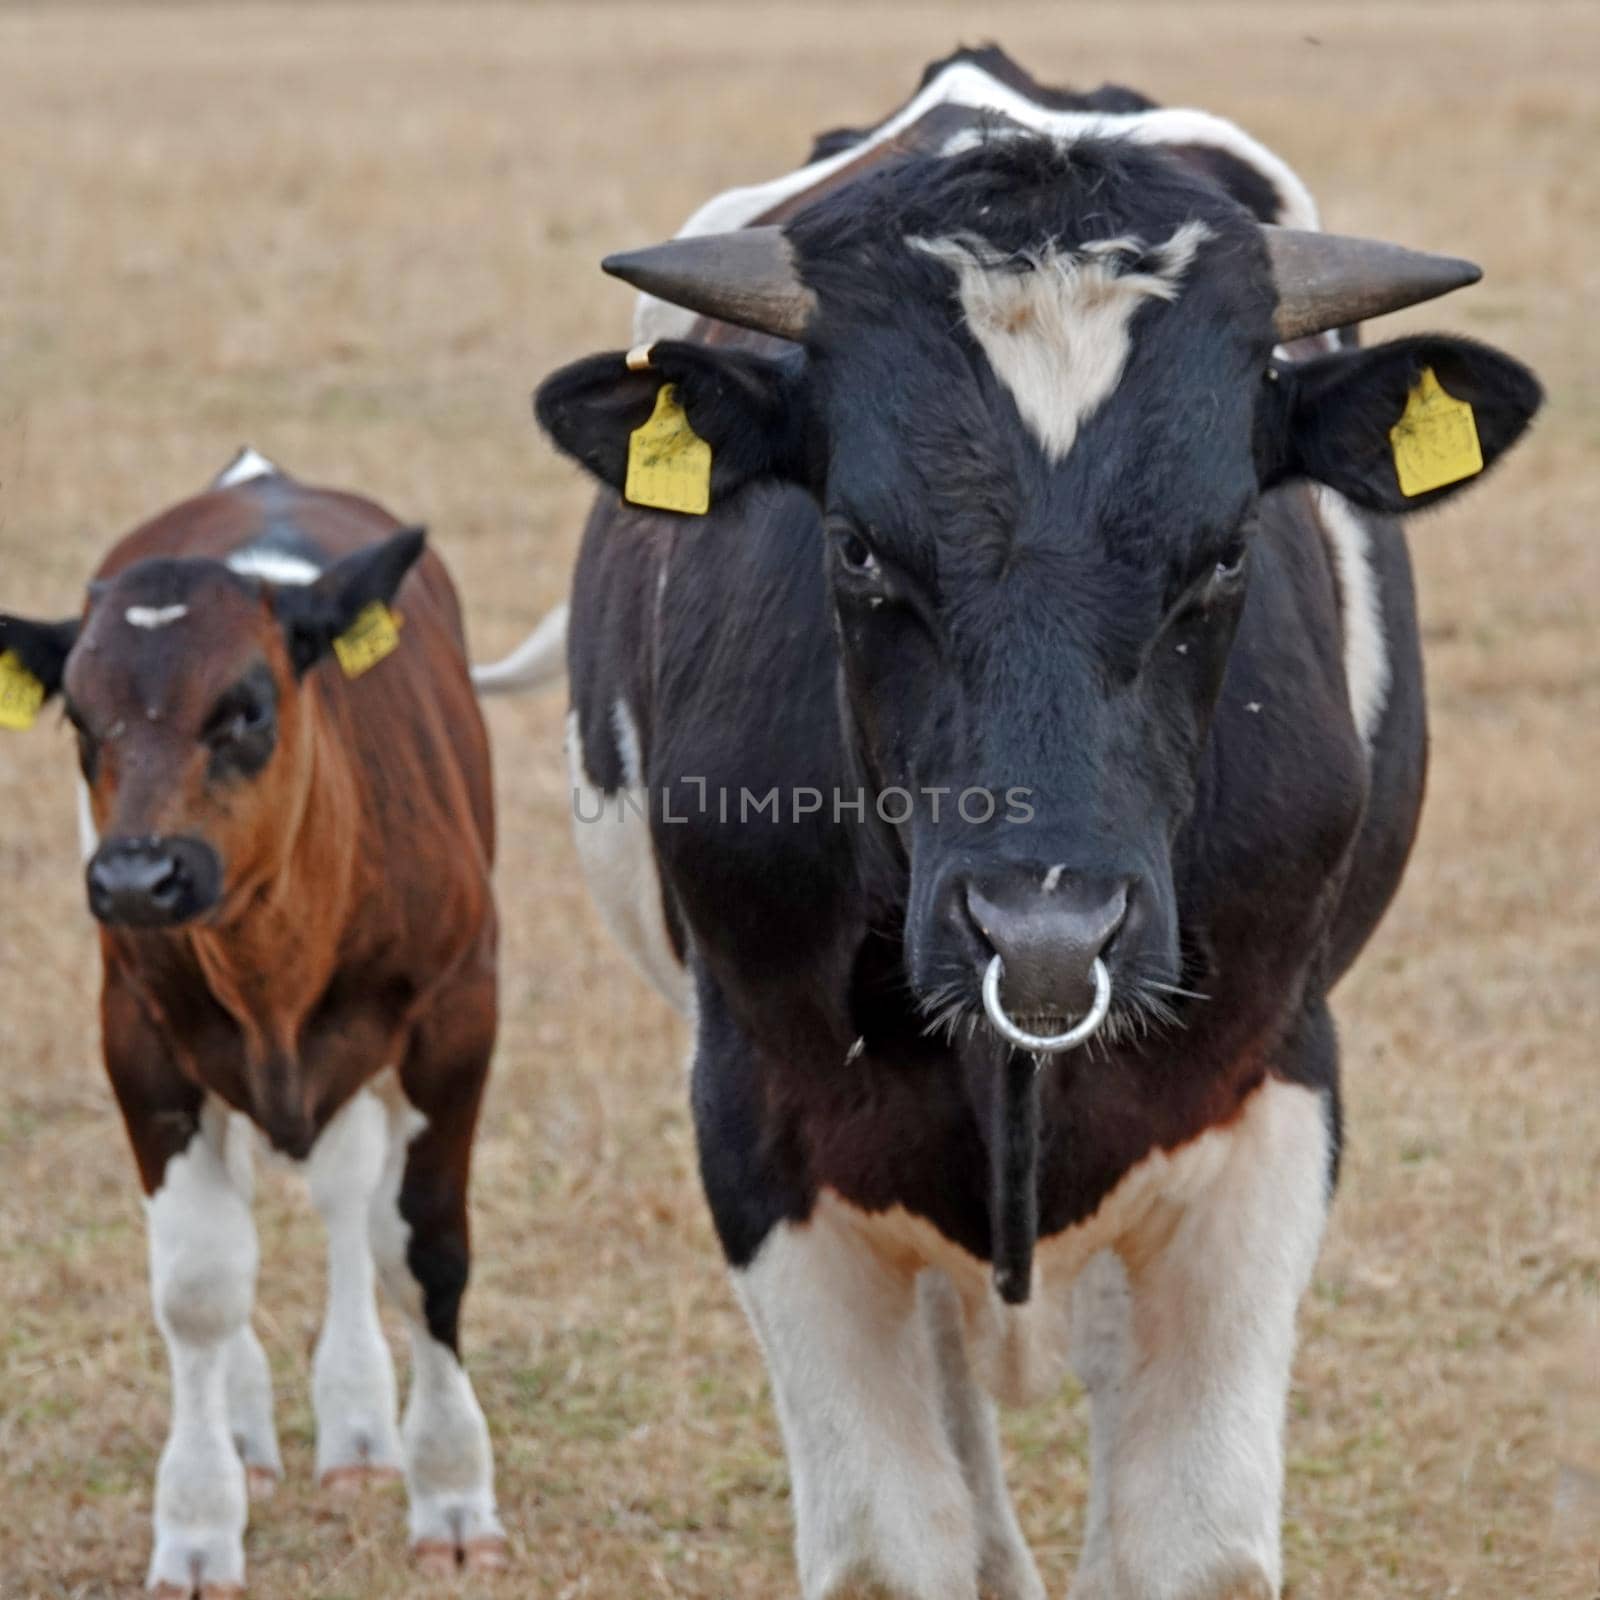 A portrait of Frisian bull. One of his offspring is standing behind him. This white-brown calf is male too. I understood the color of such a brown-black calf changes later in black.